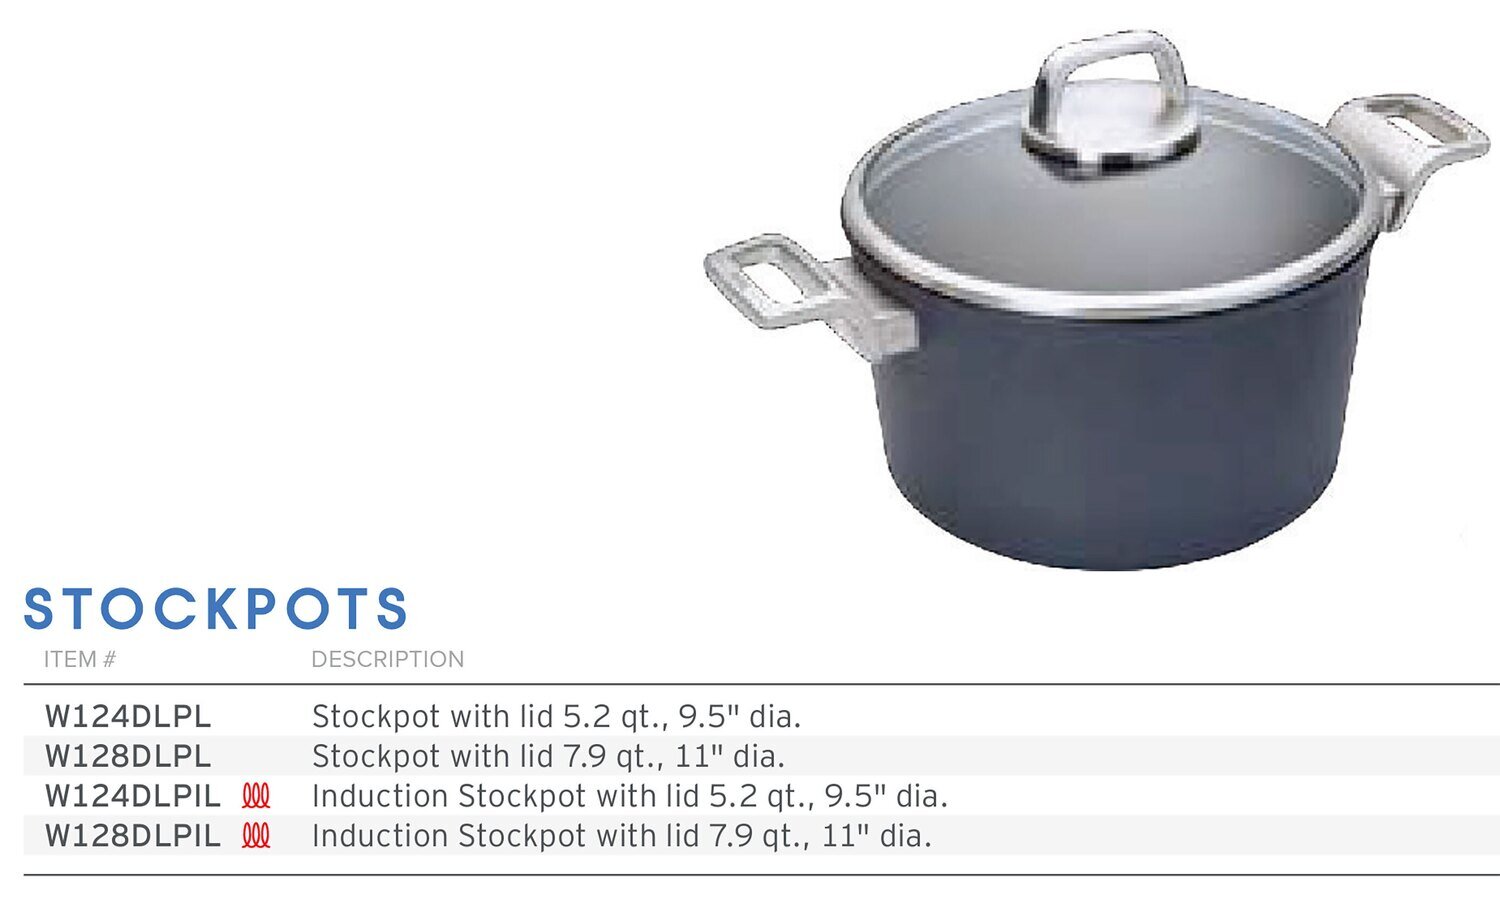 Frieling Diamond Lite Induction Stockpot with Lid 5.25 Qt. 9.5" W124DPIL